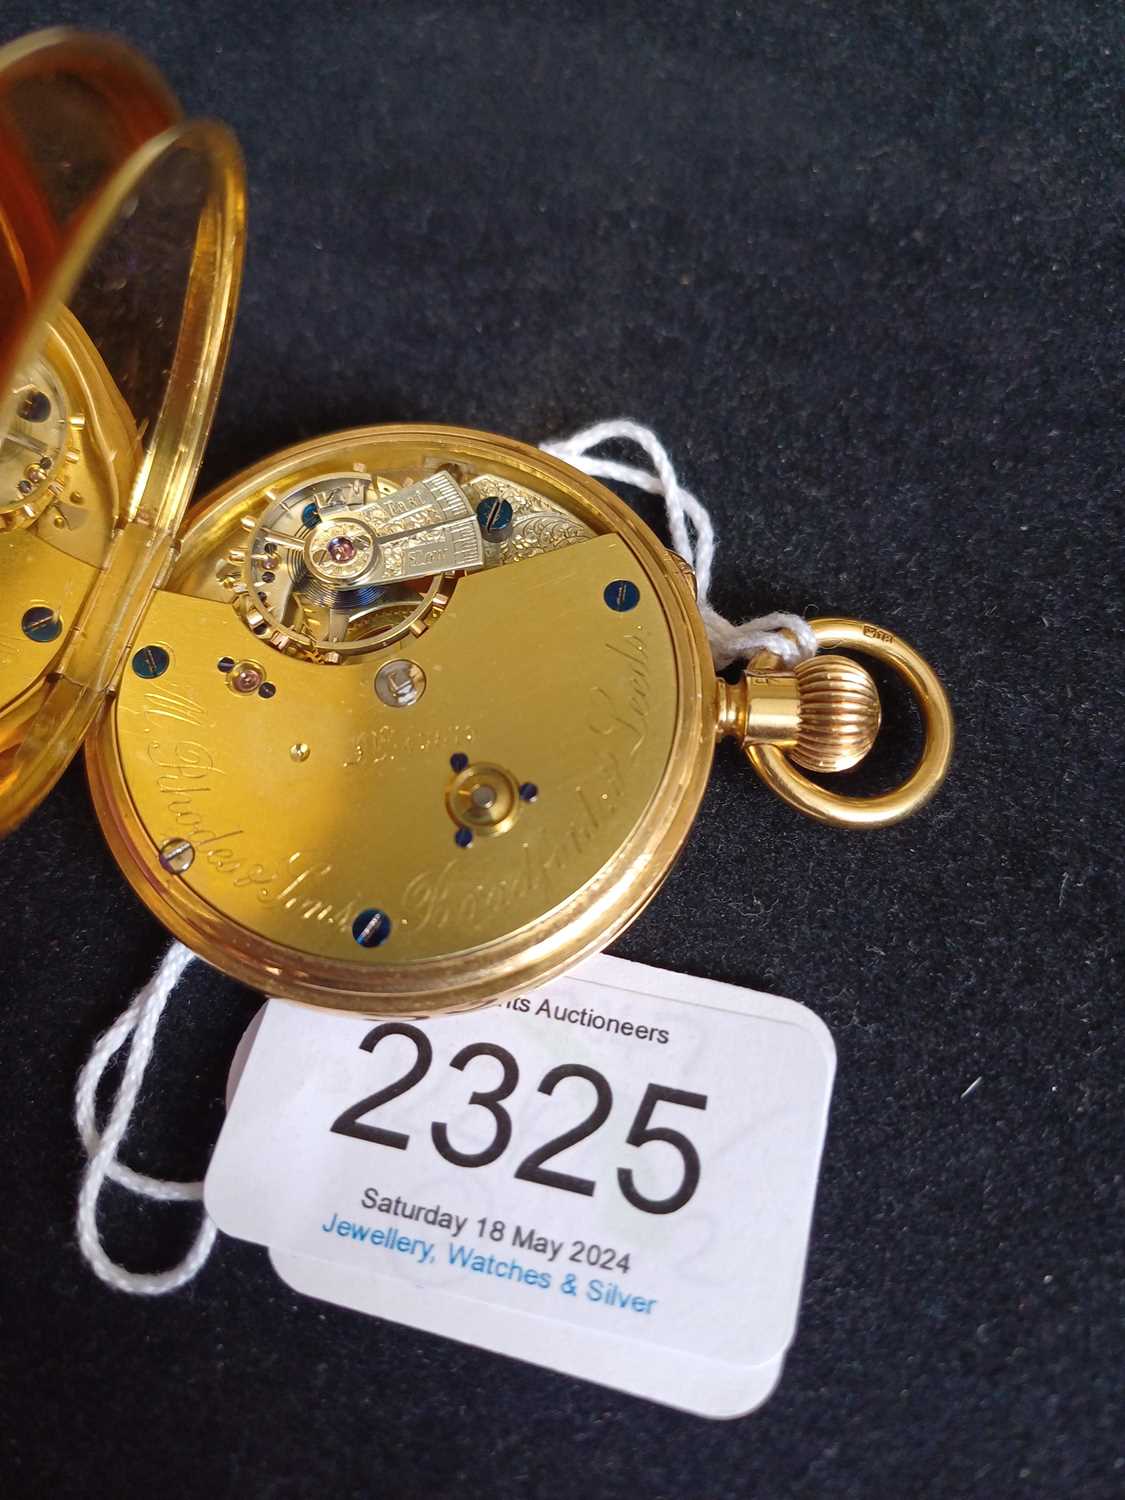 Rhodes & Sons: An 18 Carat Gold Open Faced Pocket Watch, retailed by M.Rhodes & Sons, Bradford & - Image 4 of 4